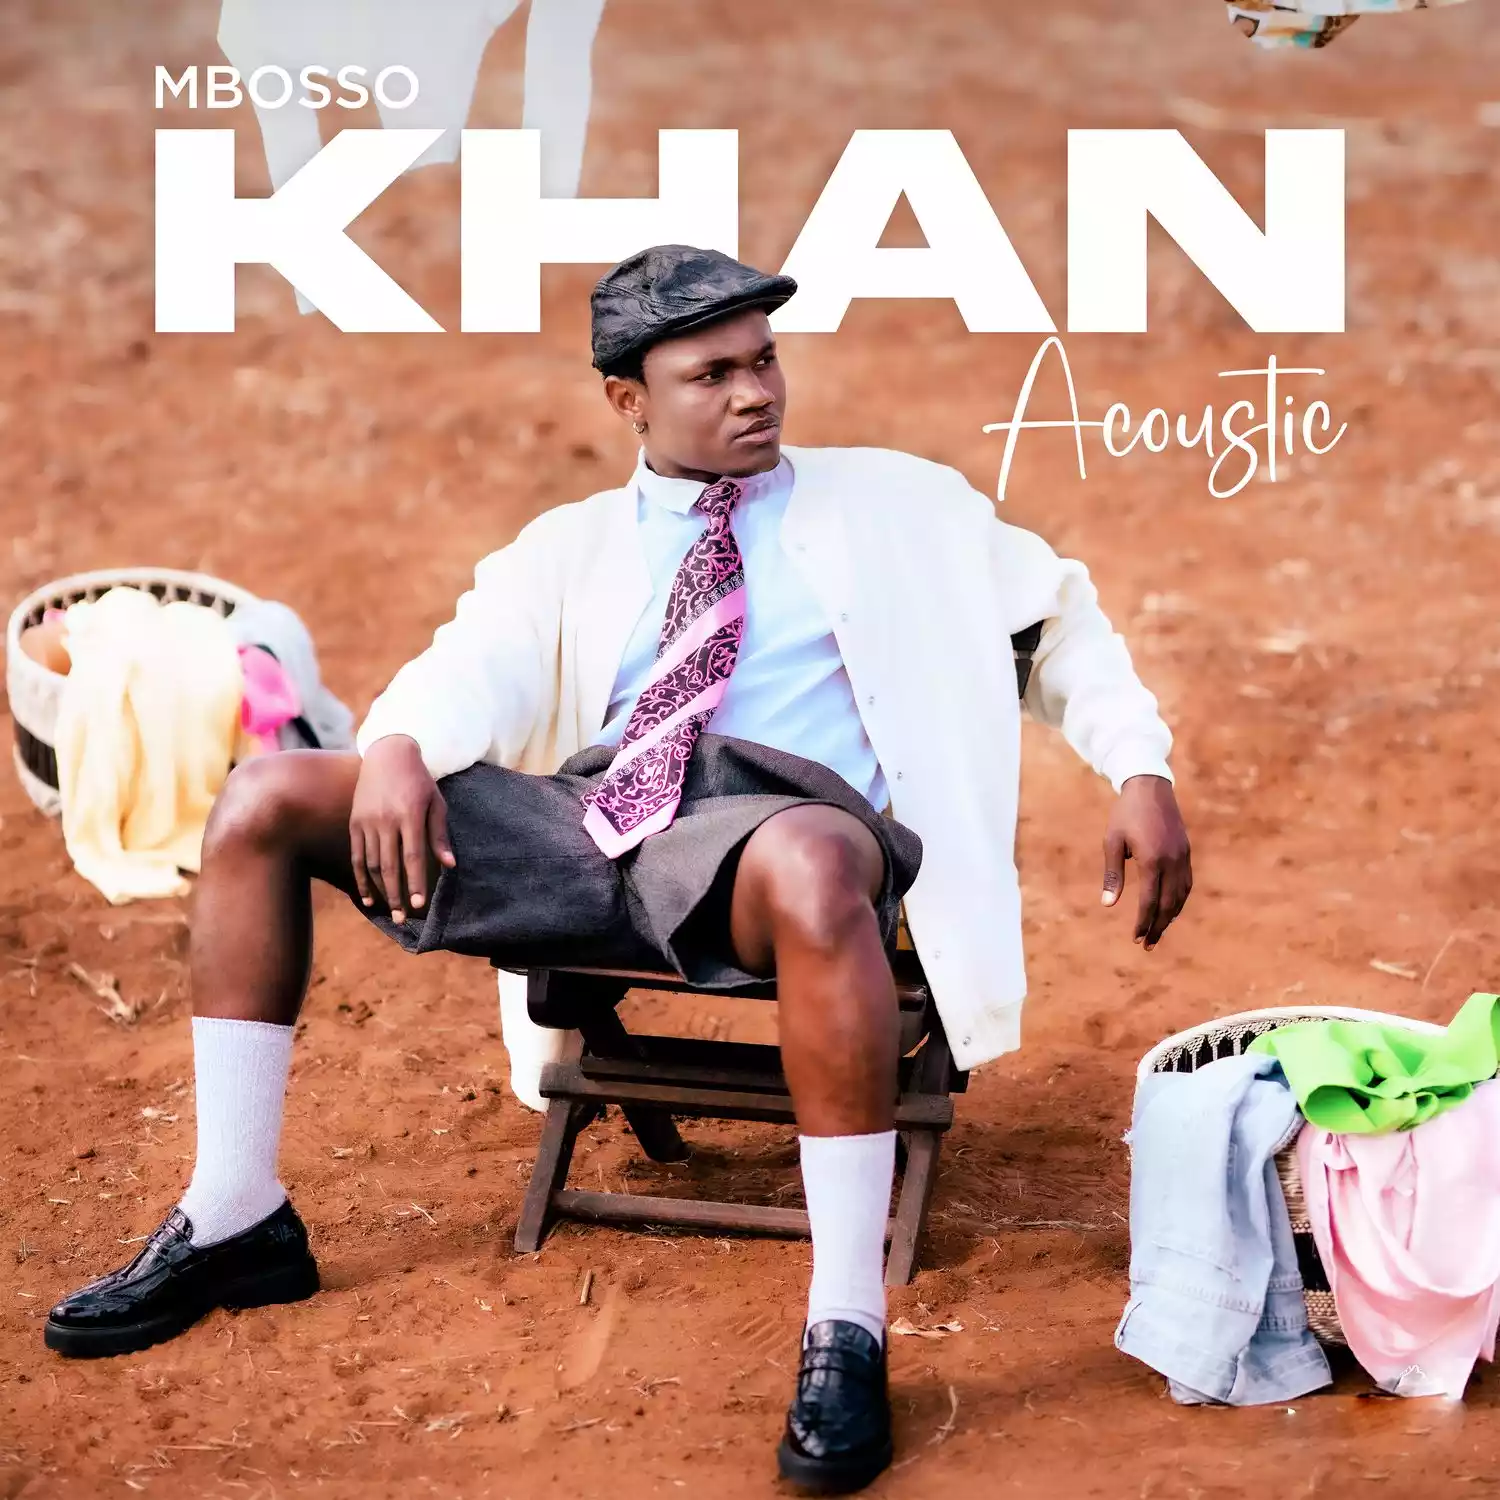 Mbosso - Khan EP (Acoustic Version) Download